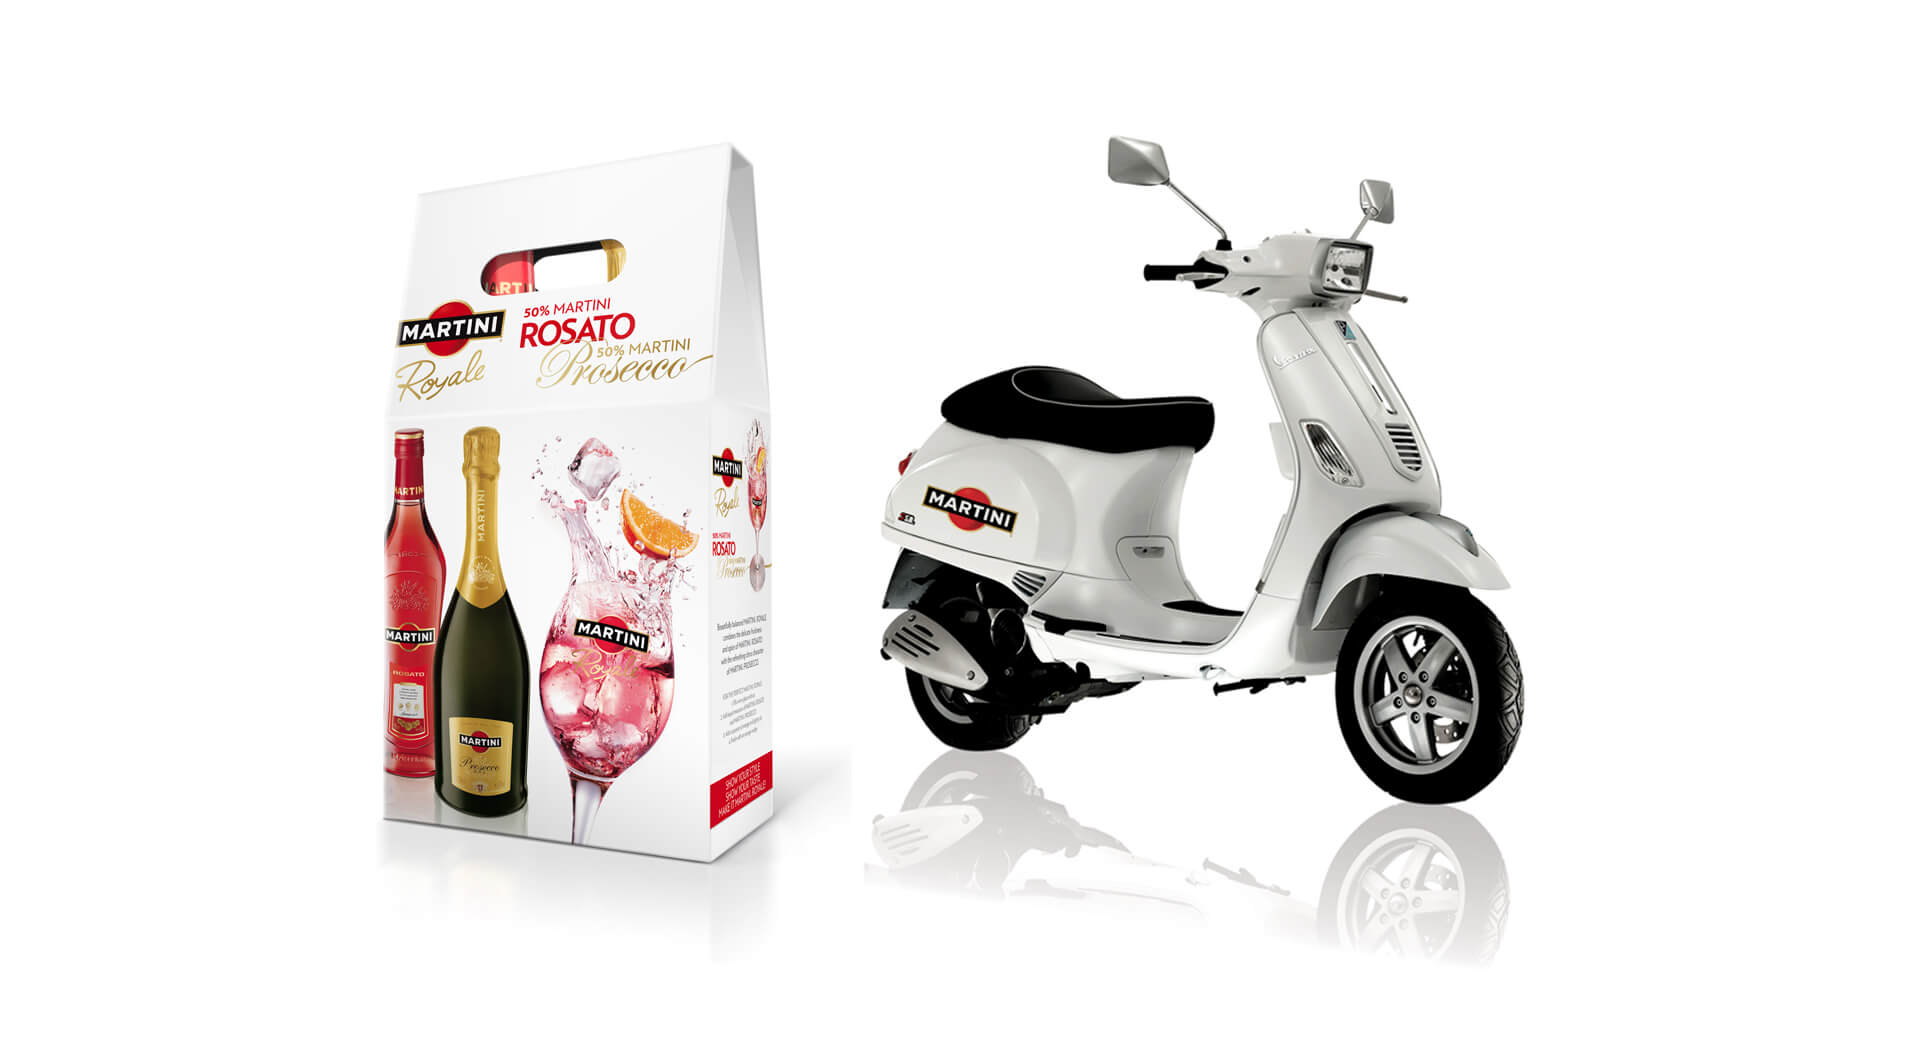  Martini Royale spirits industry promotion campaigns win a Vespa travel retail, airports, and packaging design for Bacardi Global Travel Retail